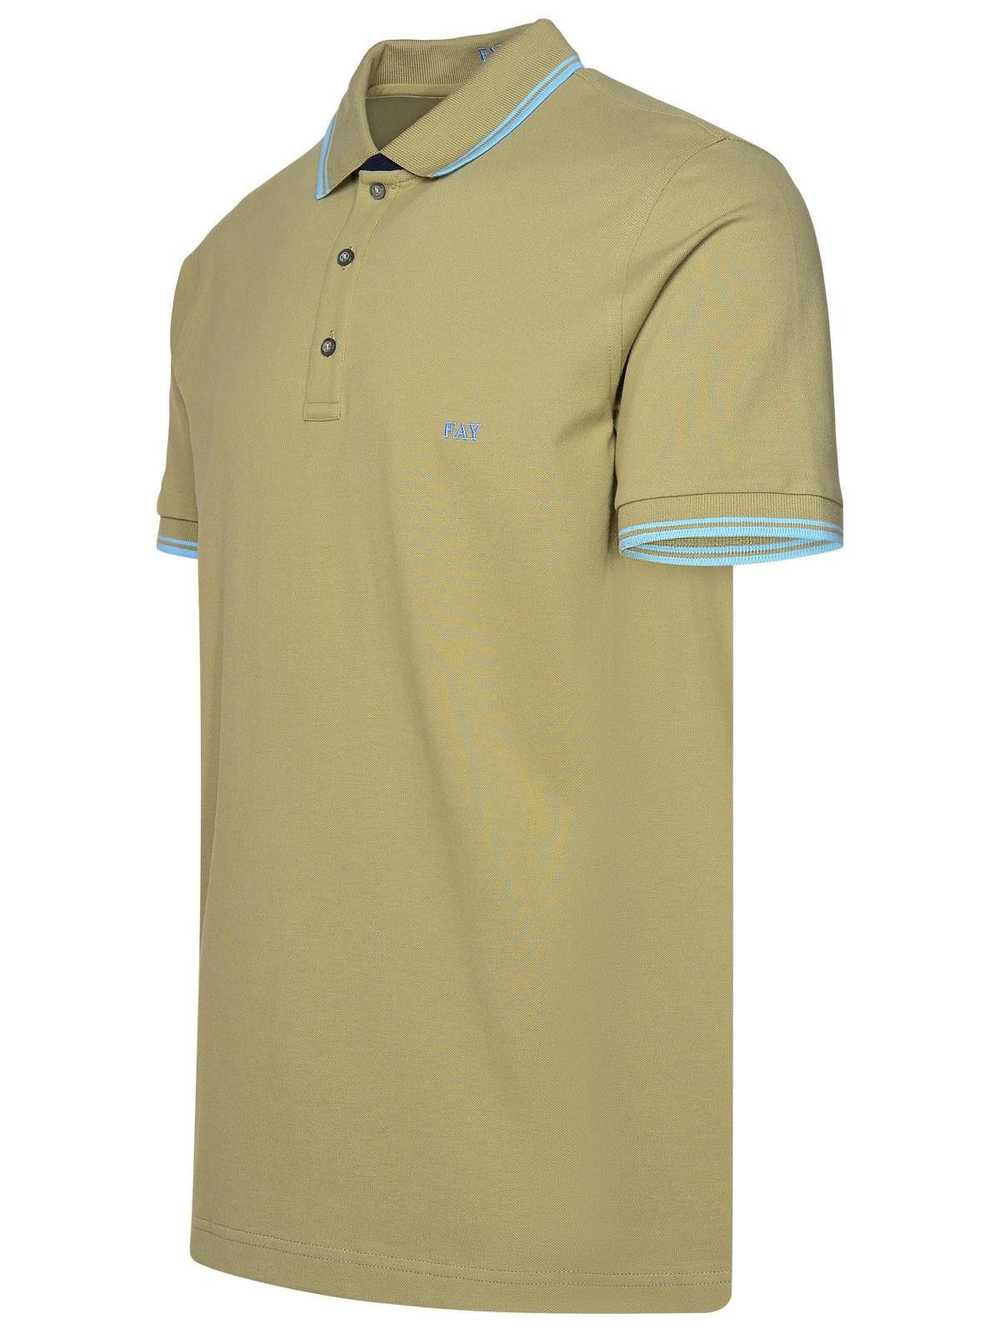 Fay FAY Polo Shirt In Green Cotton Blend - image 2